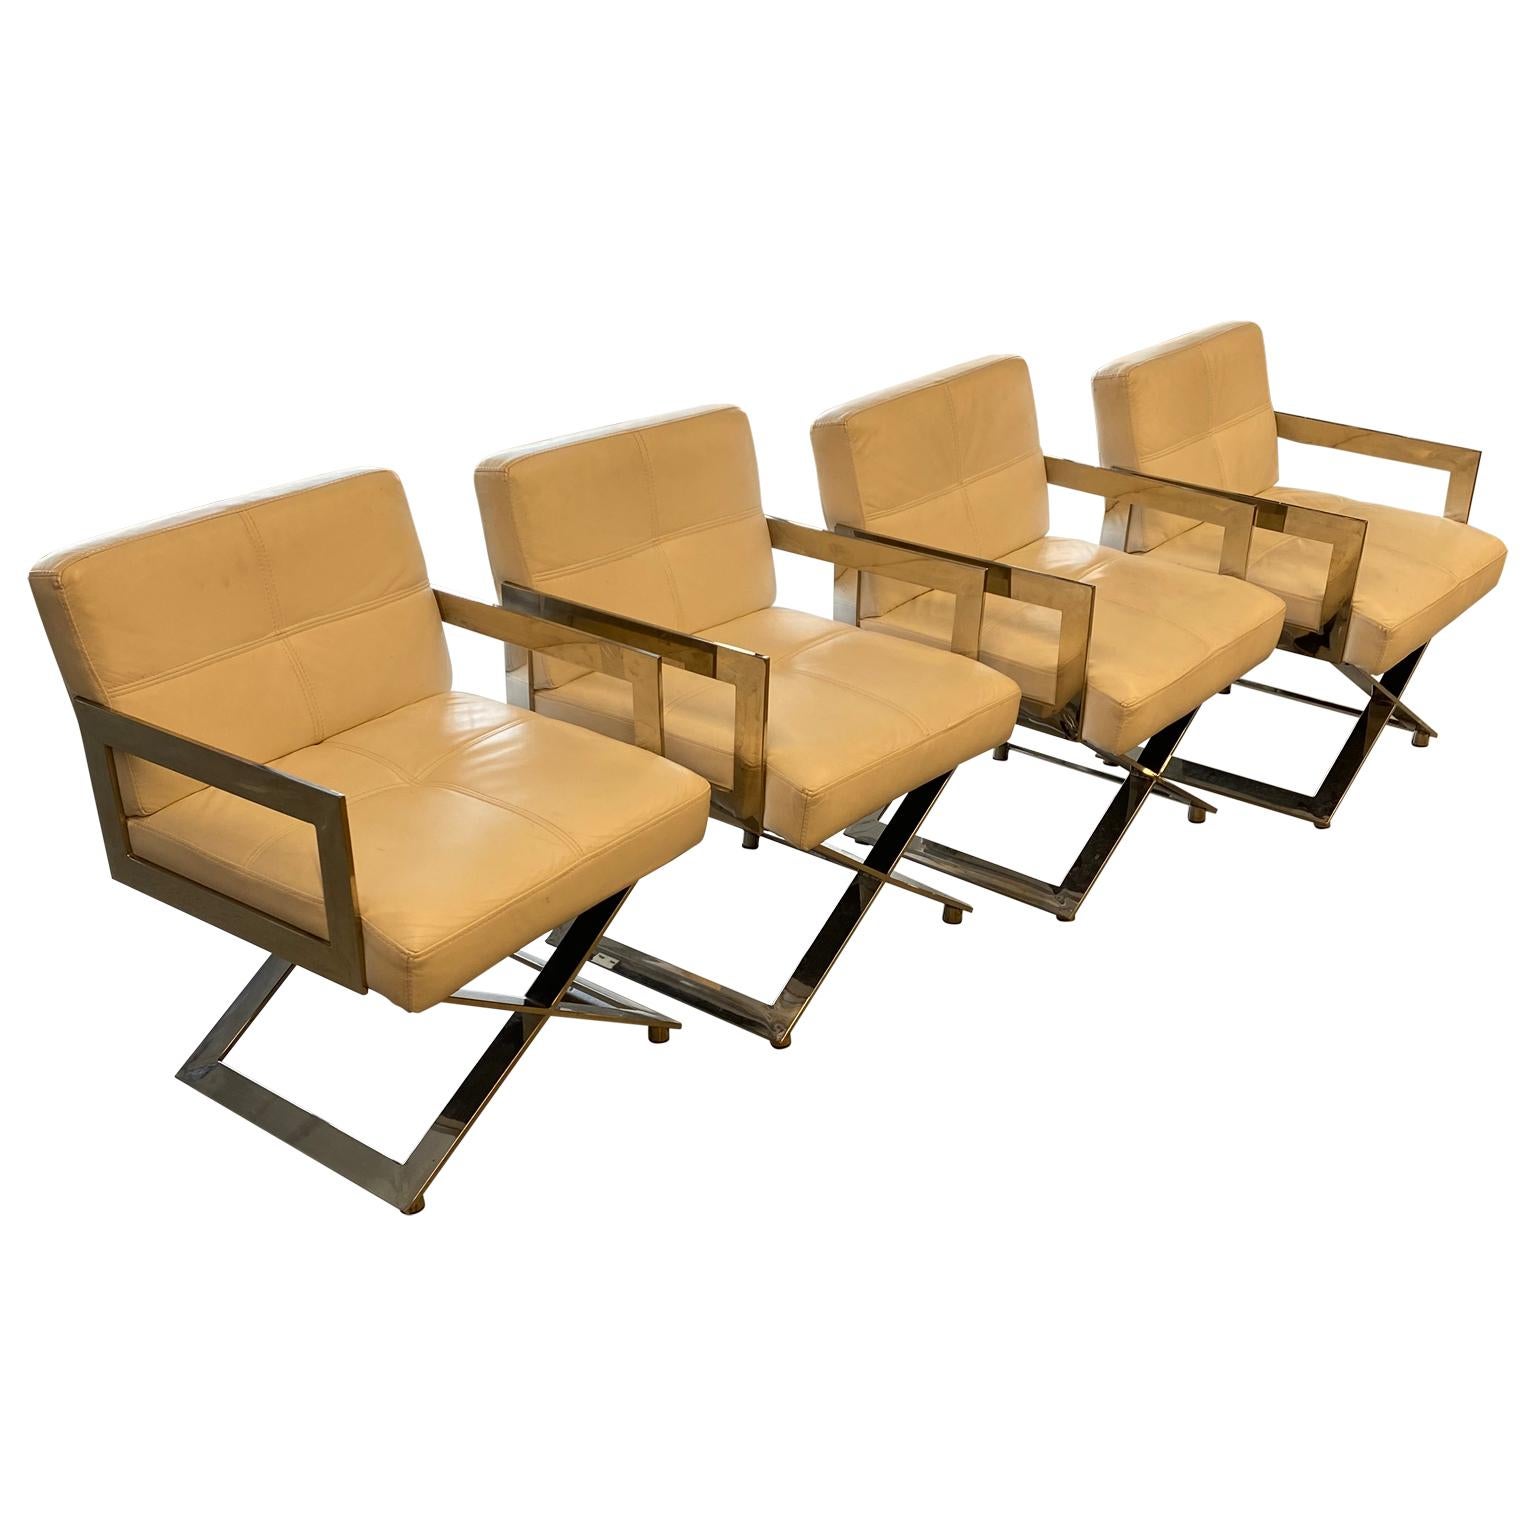 Set of eight Mid-Century Modern Chrome Dining Room Armchairs By Milo Baughman

The chairs are made in polished chrome and white faux leather fabric.
